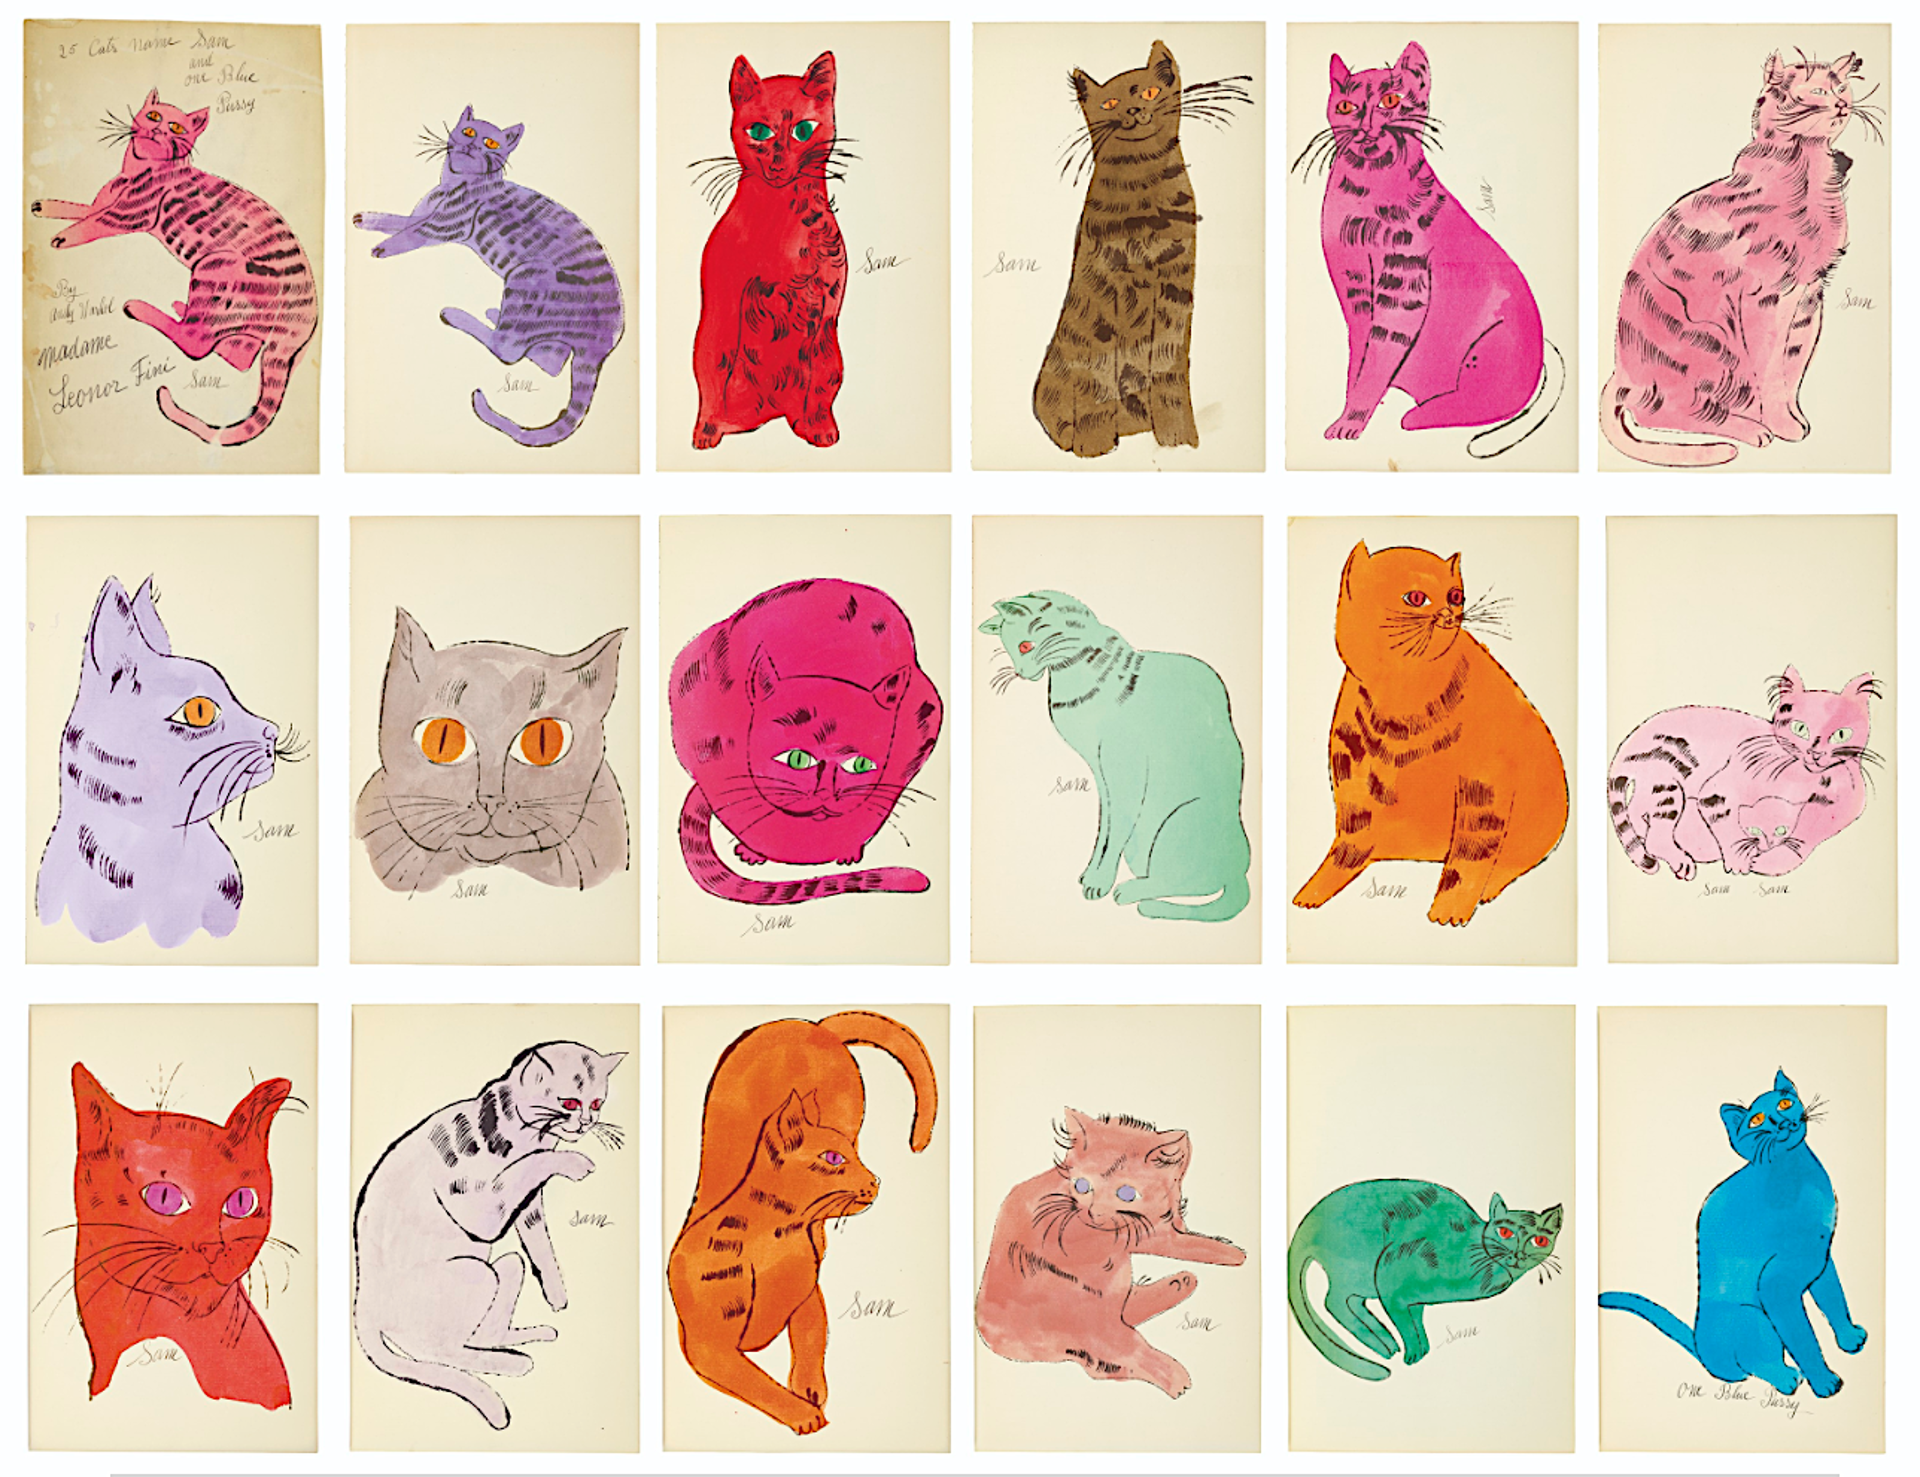 25 Cats Name(d) Sam and One Blue Pussy (complete intact book of watercolors) by Andy Warhol